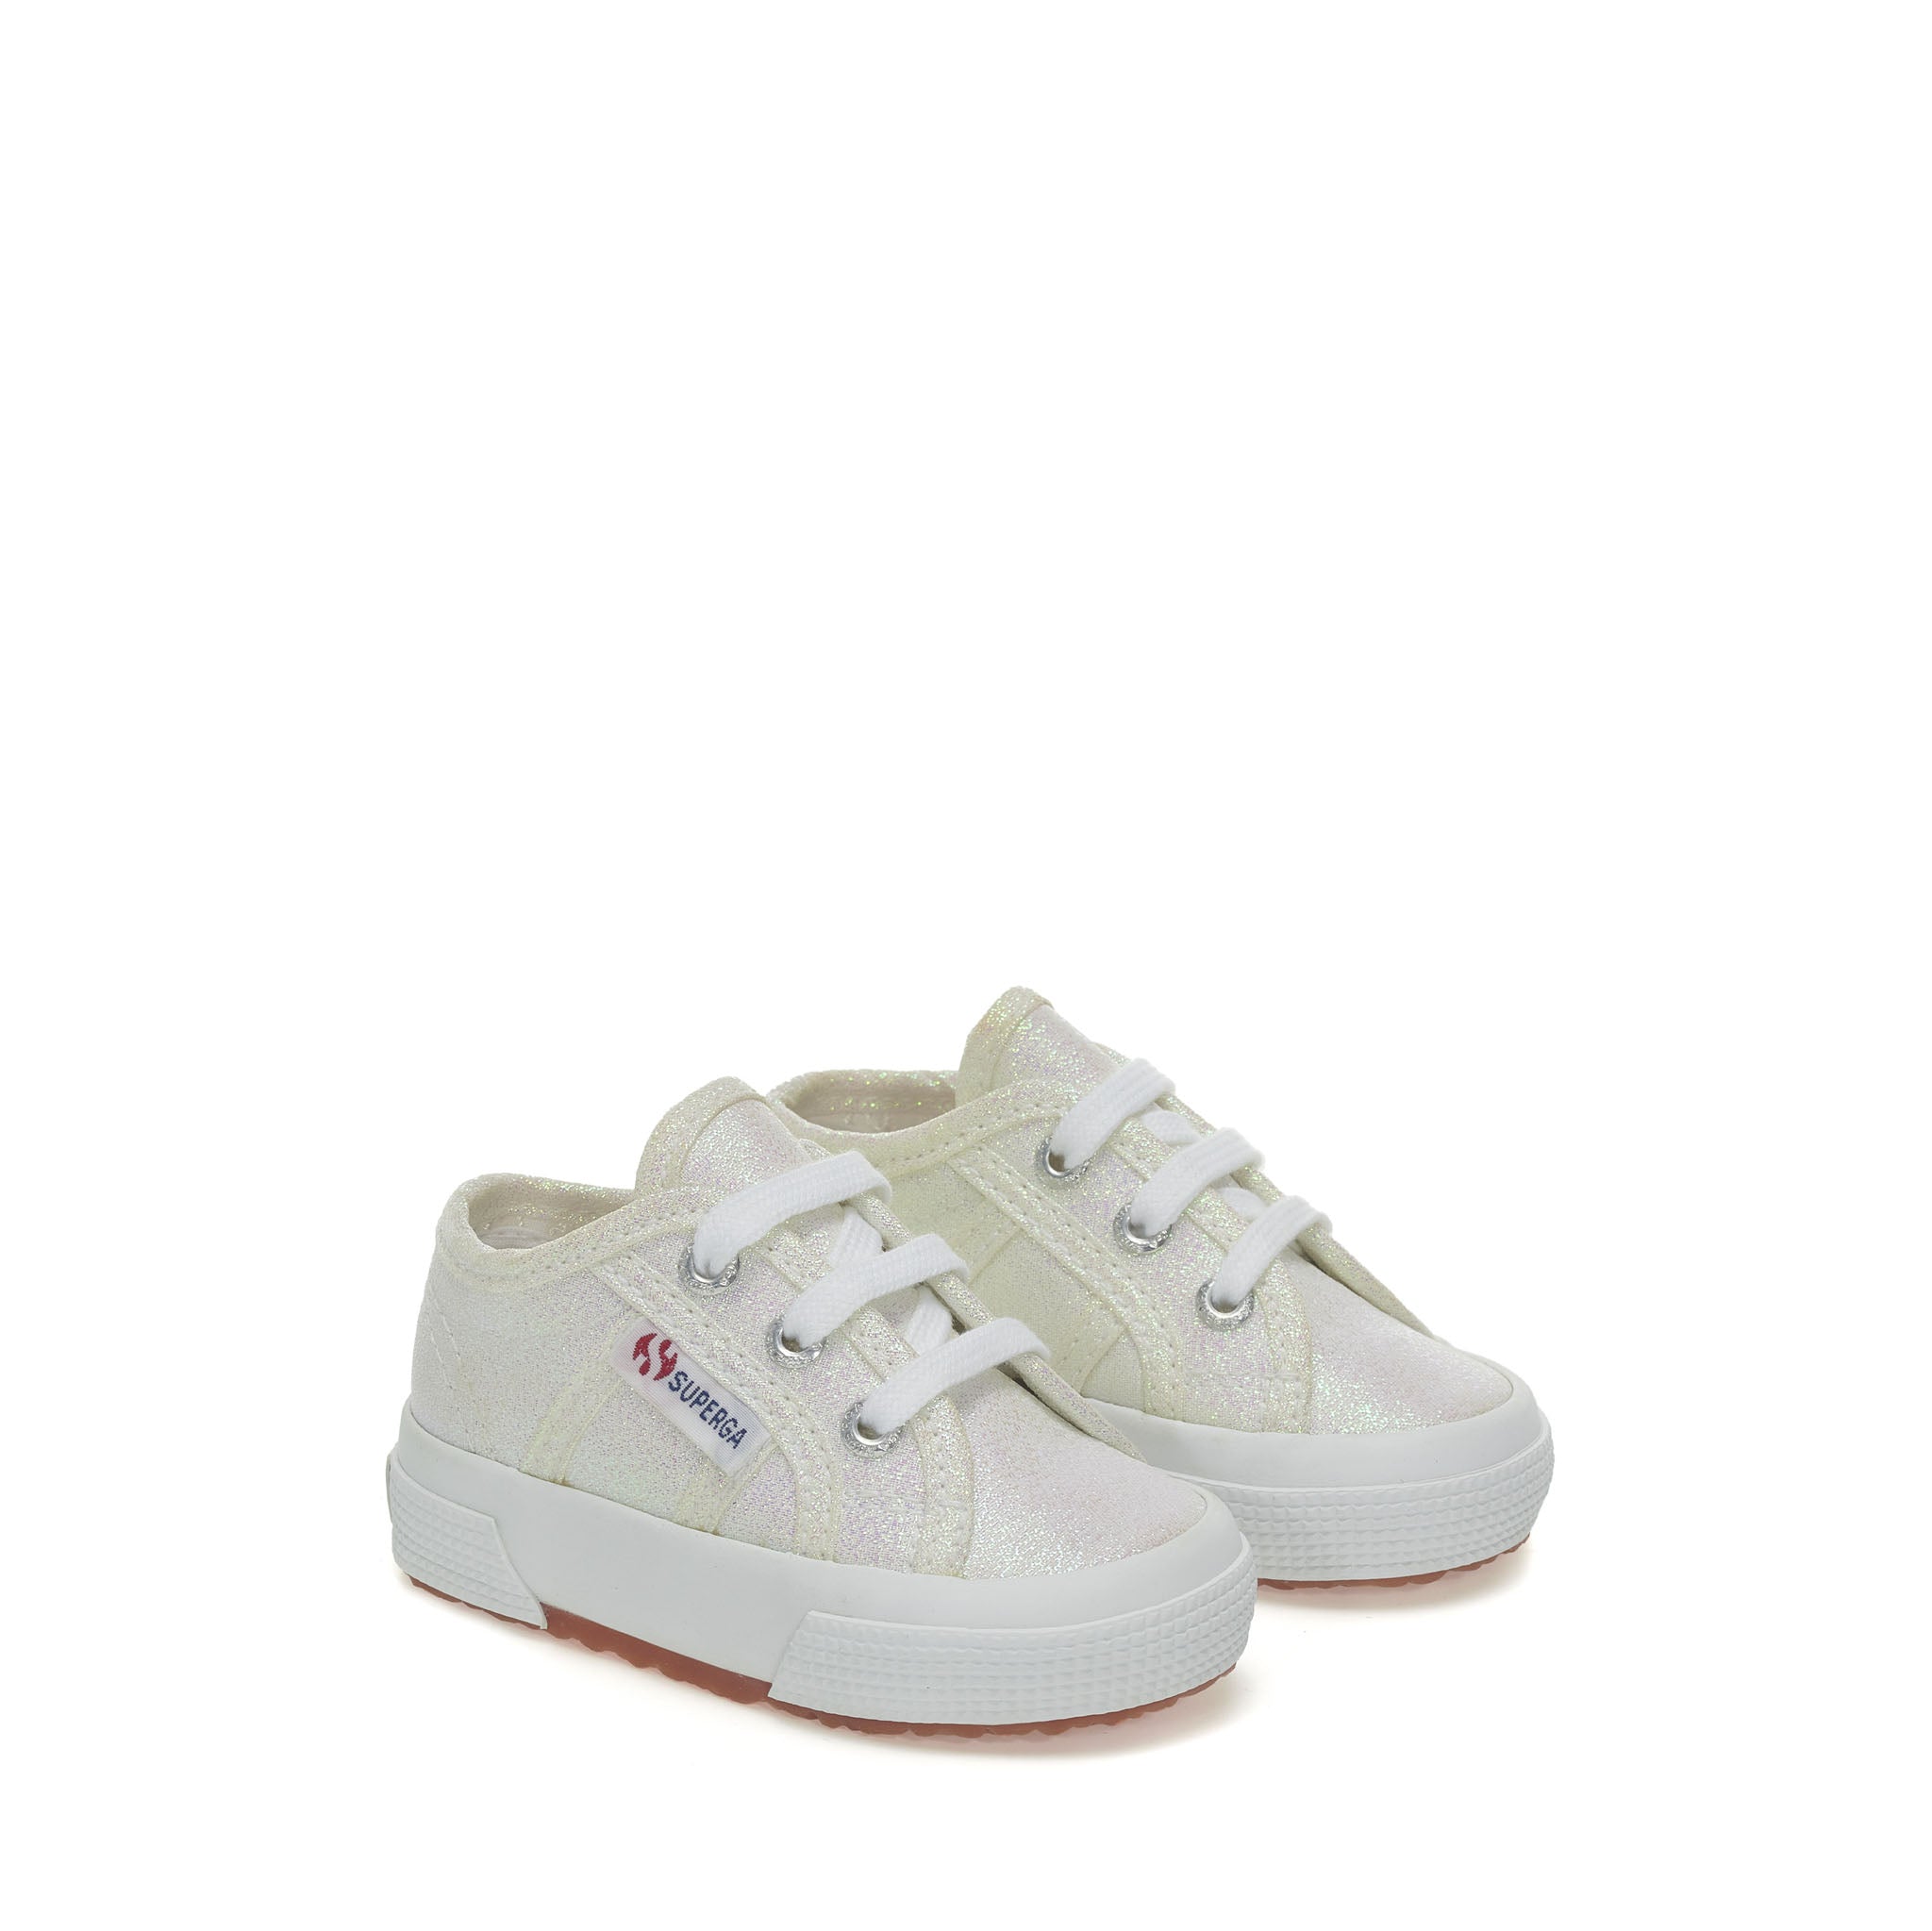 Superga 2750 Baby Lam√© Sneakers - Iridescent. Front view.